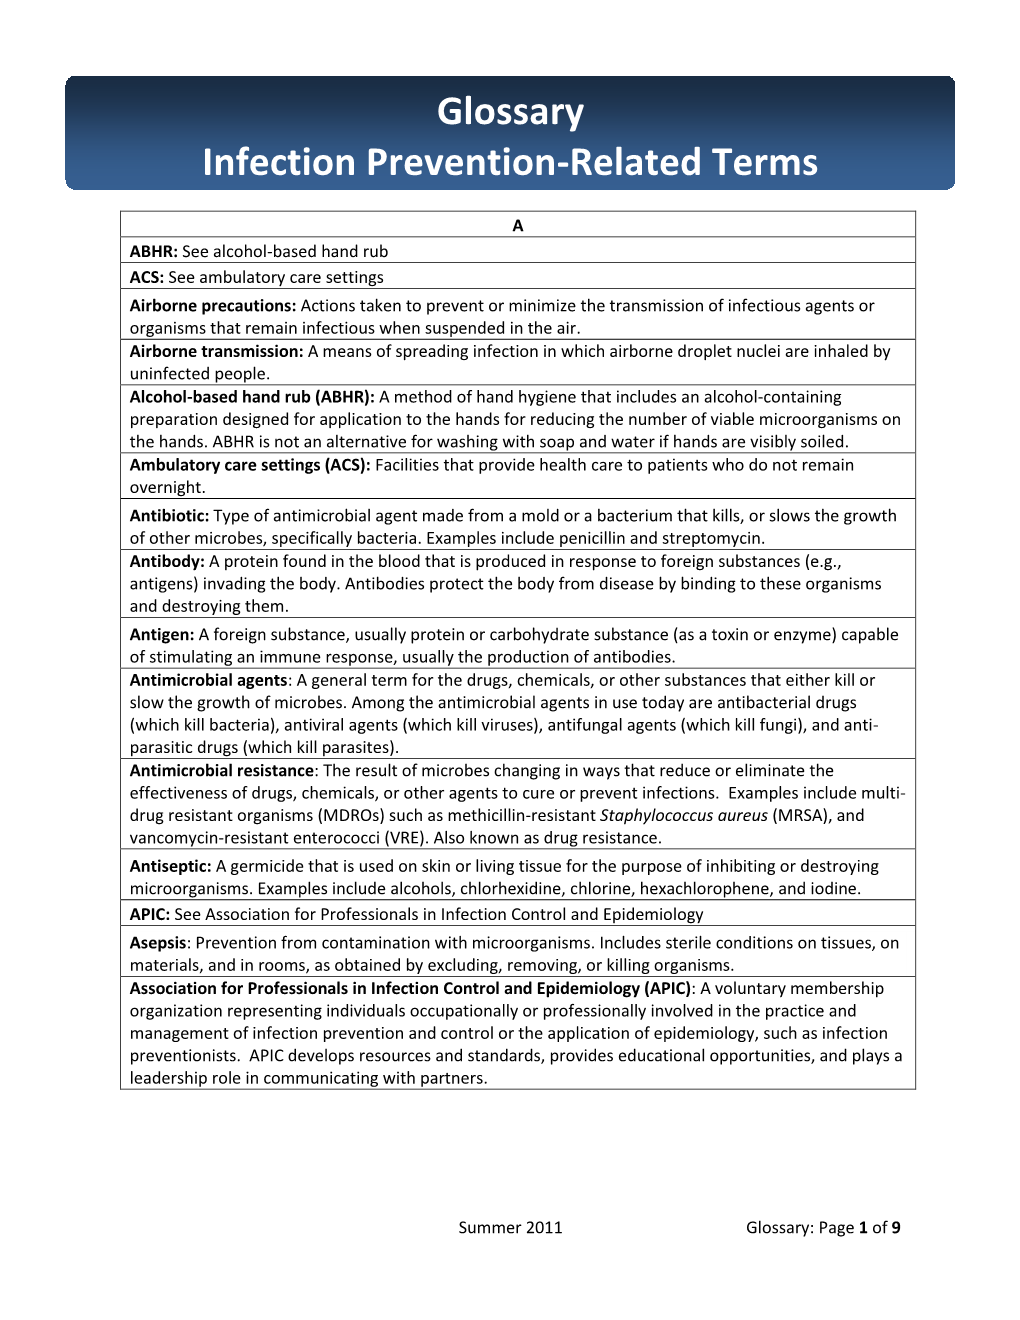 Glossary Infection Prevention-Related Terms